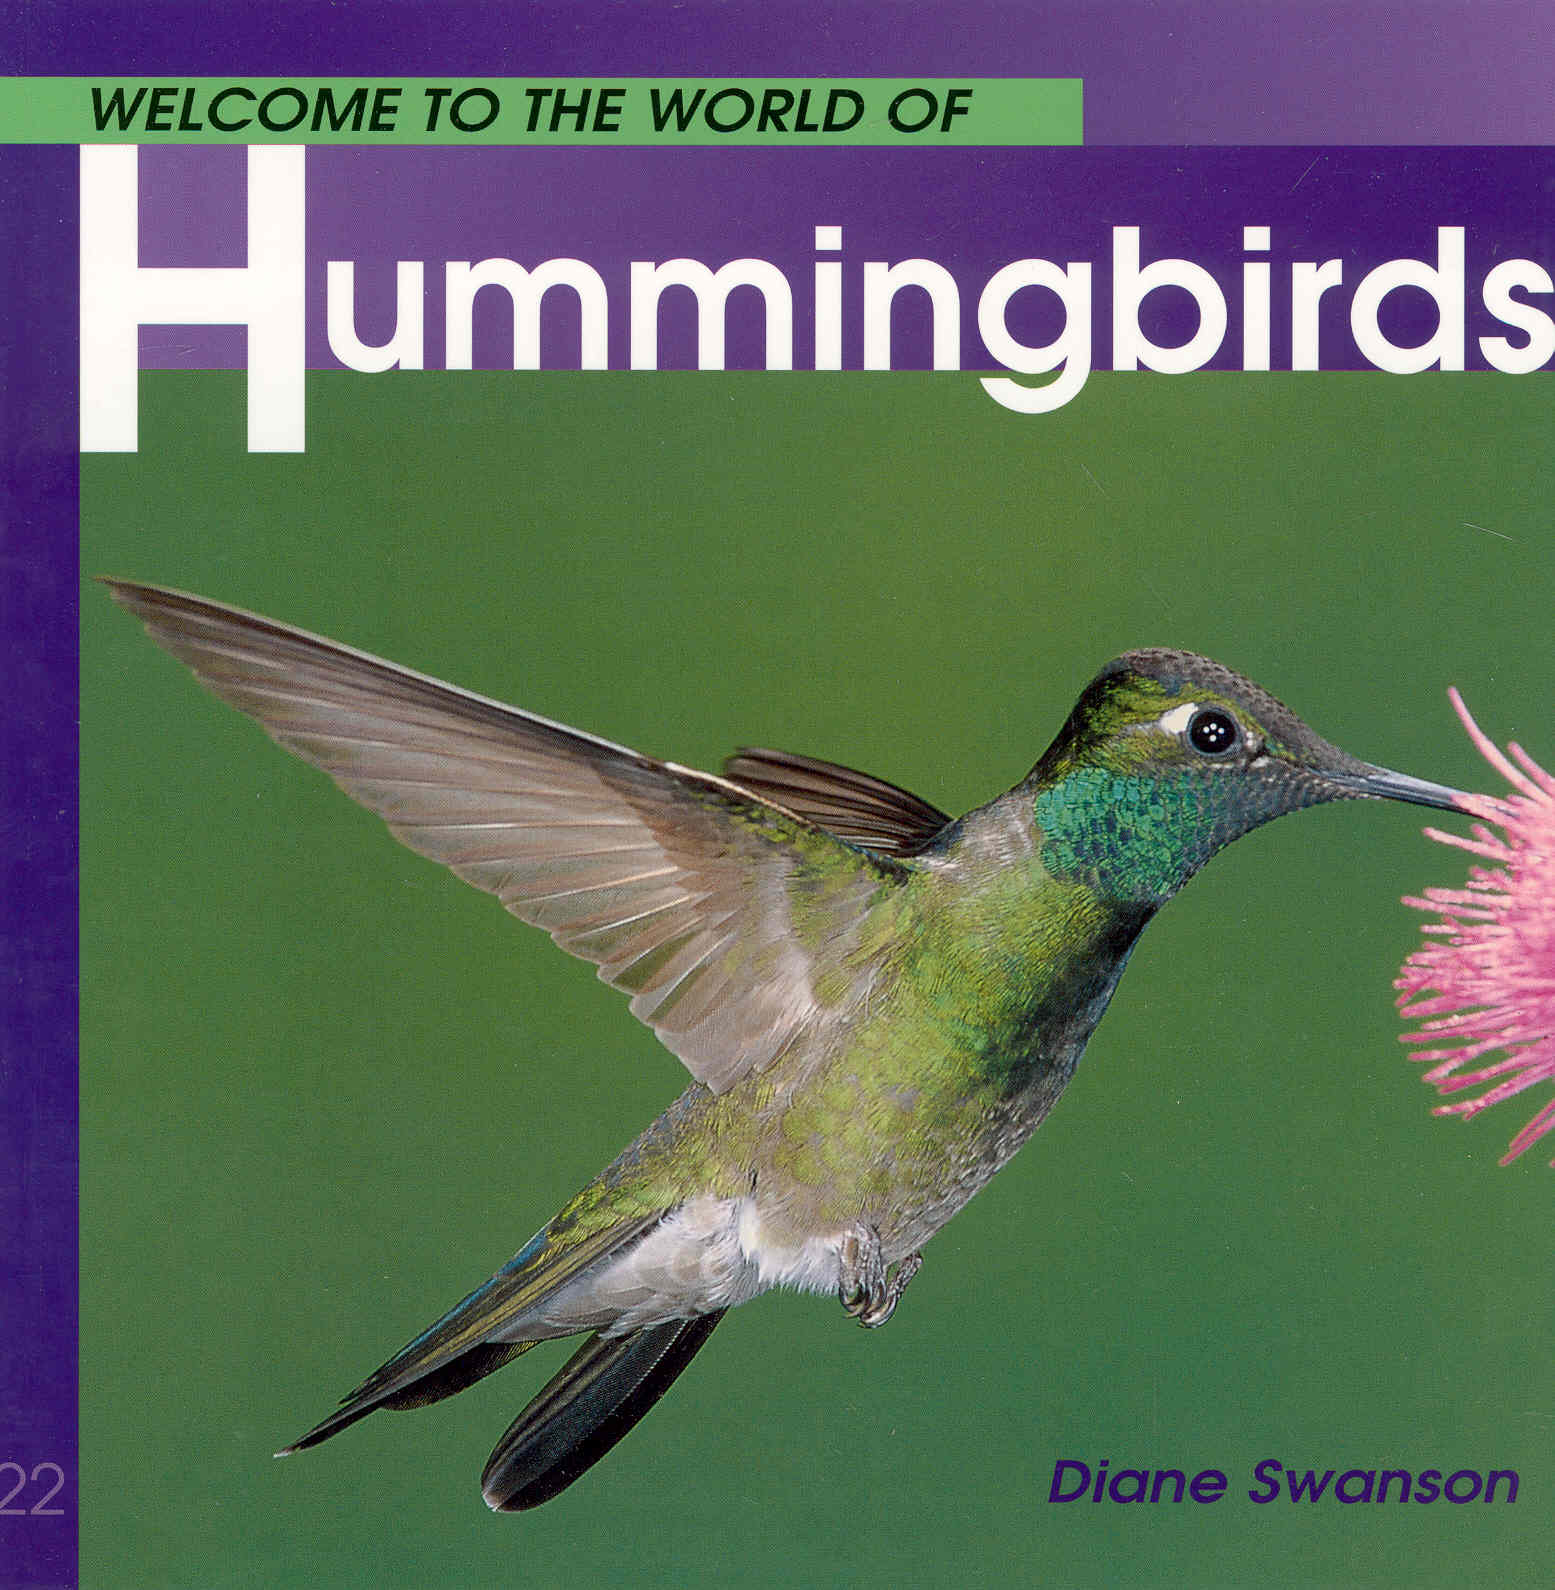 Welcome To The World Of Hummingbirds